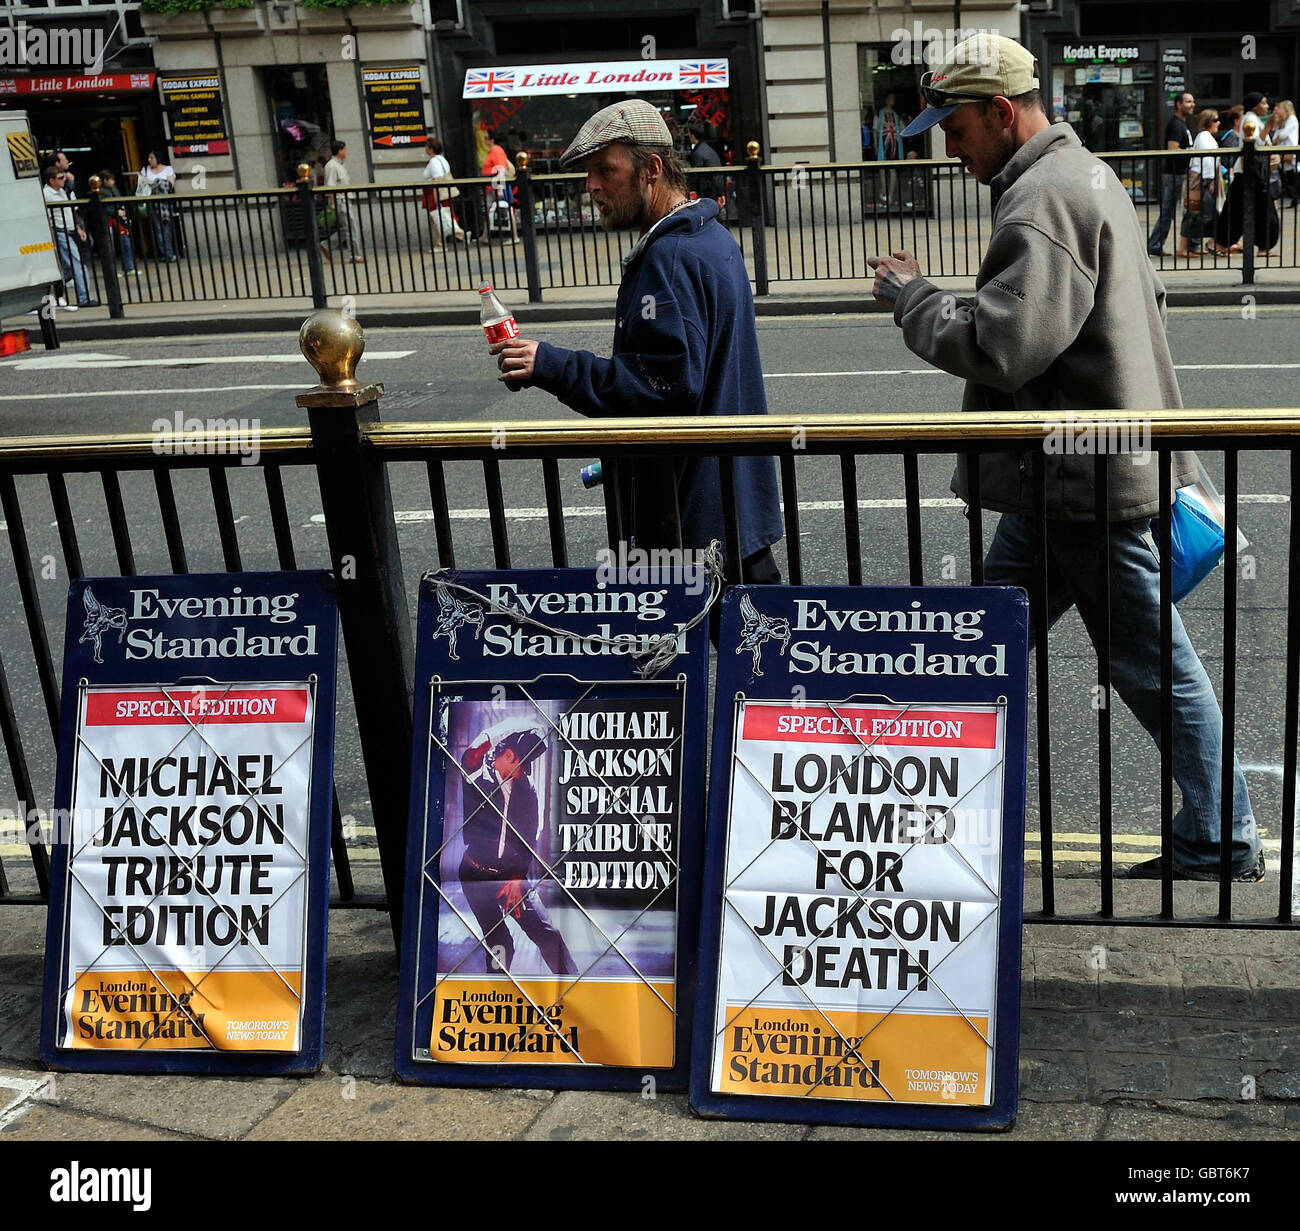 Michael Jackson dies aged 50. Evening Standard headlines in London following the death of the King of Pop Michael Jackson. Stock Photo